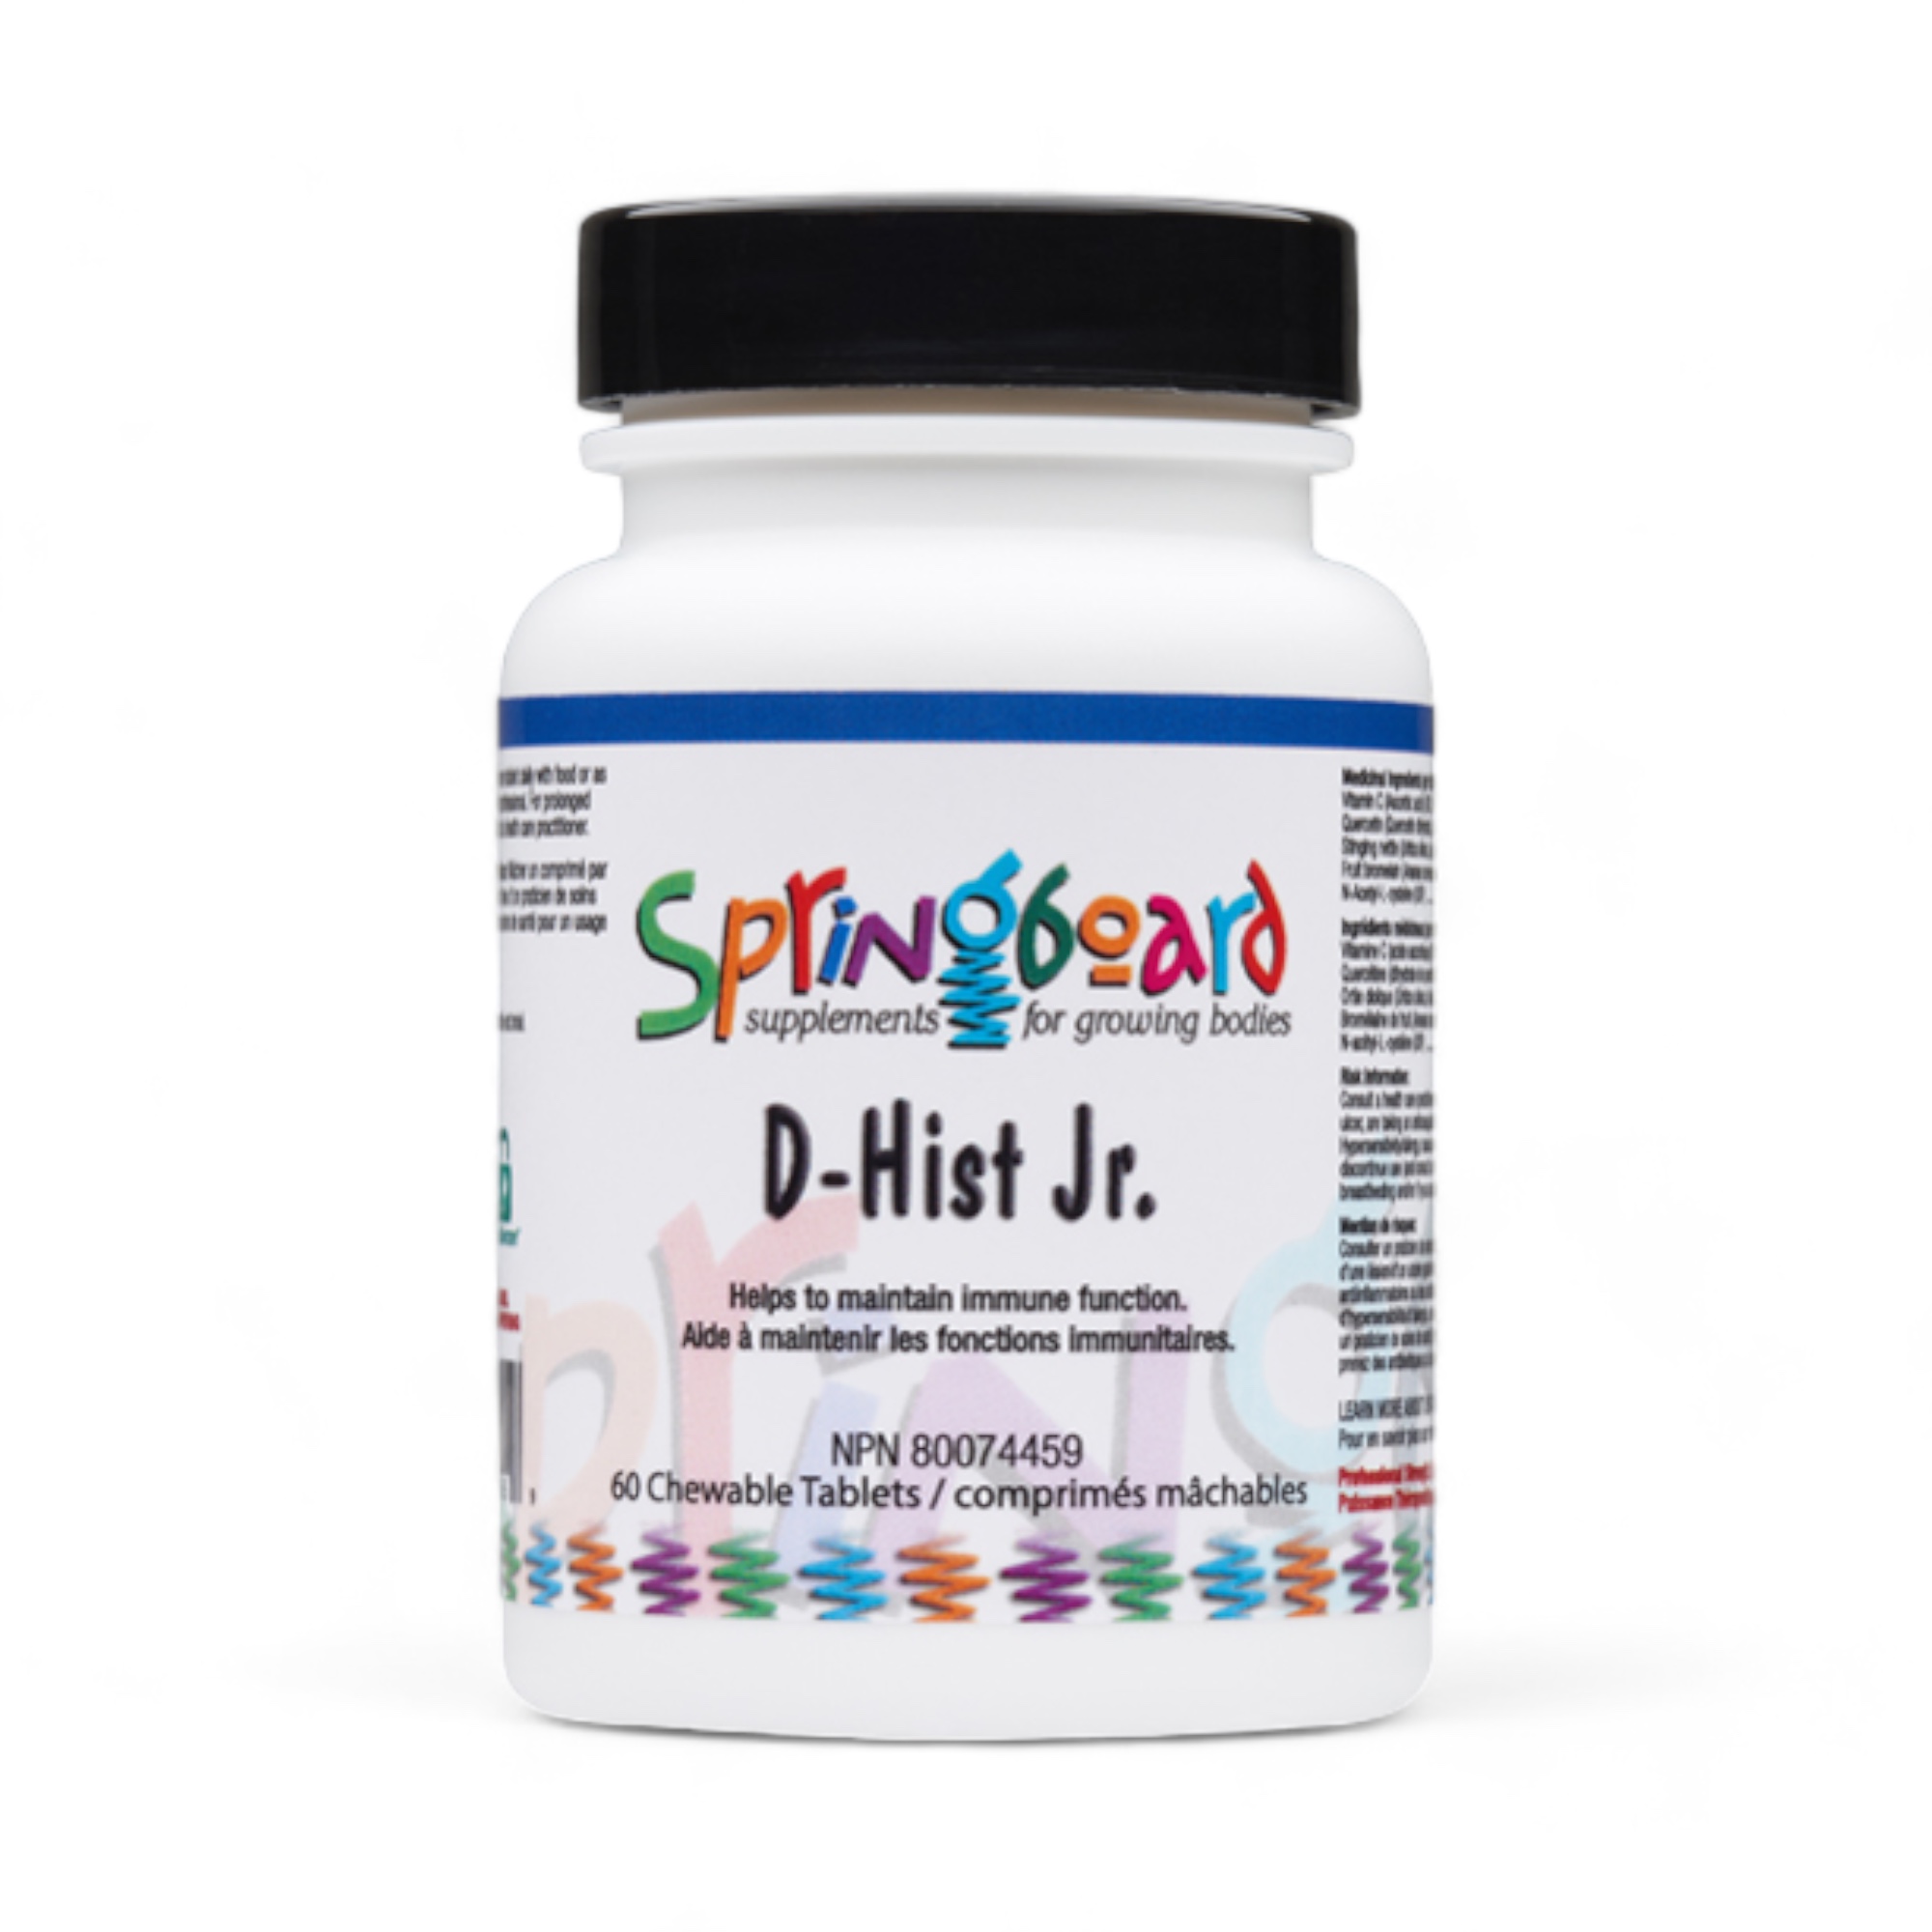 D-Hist Jr. "Springboard" 60 chewable capsules Ortho Molecular Products